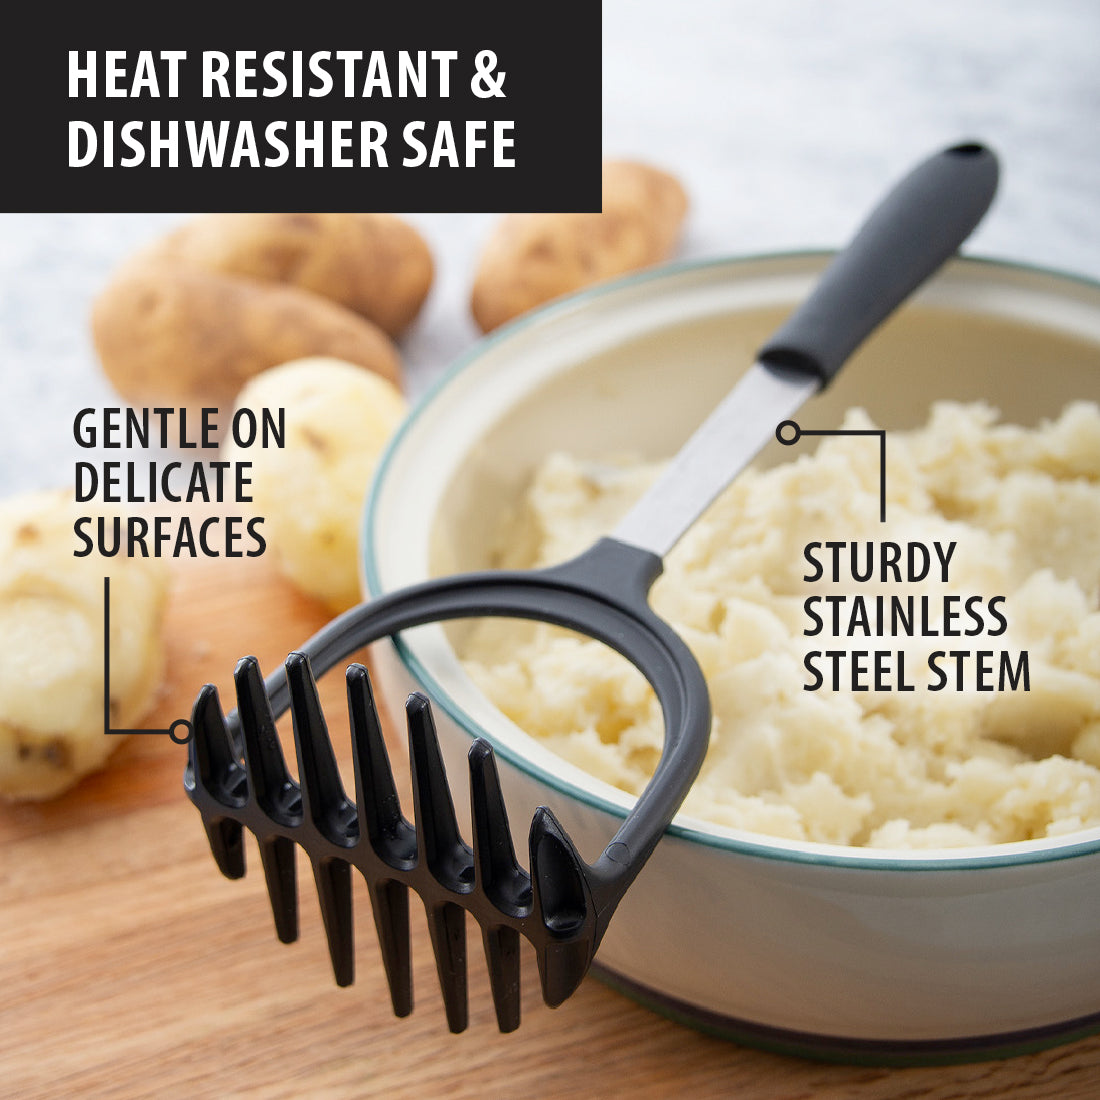 Best Selling Products New Trending Heat Resistant Potato Masher